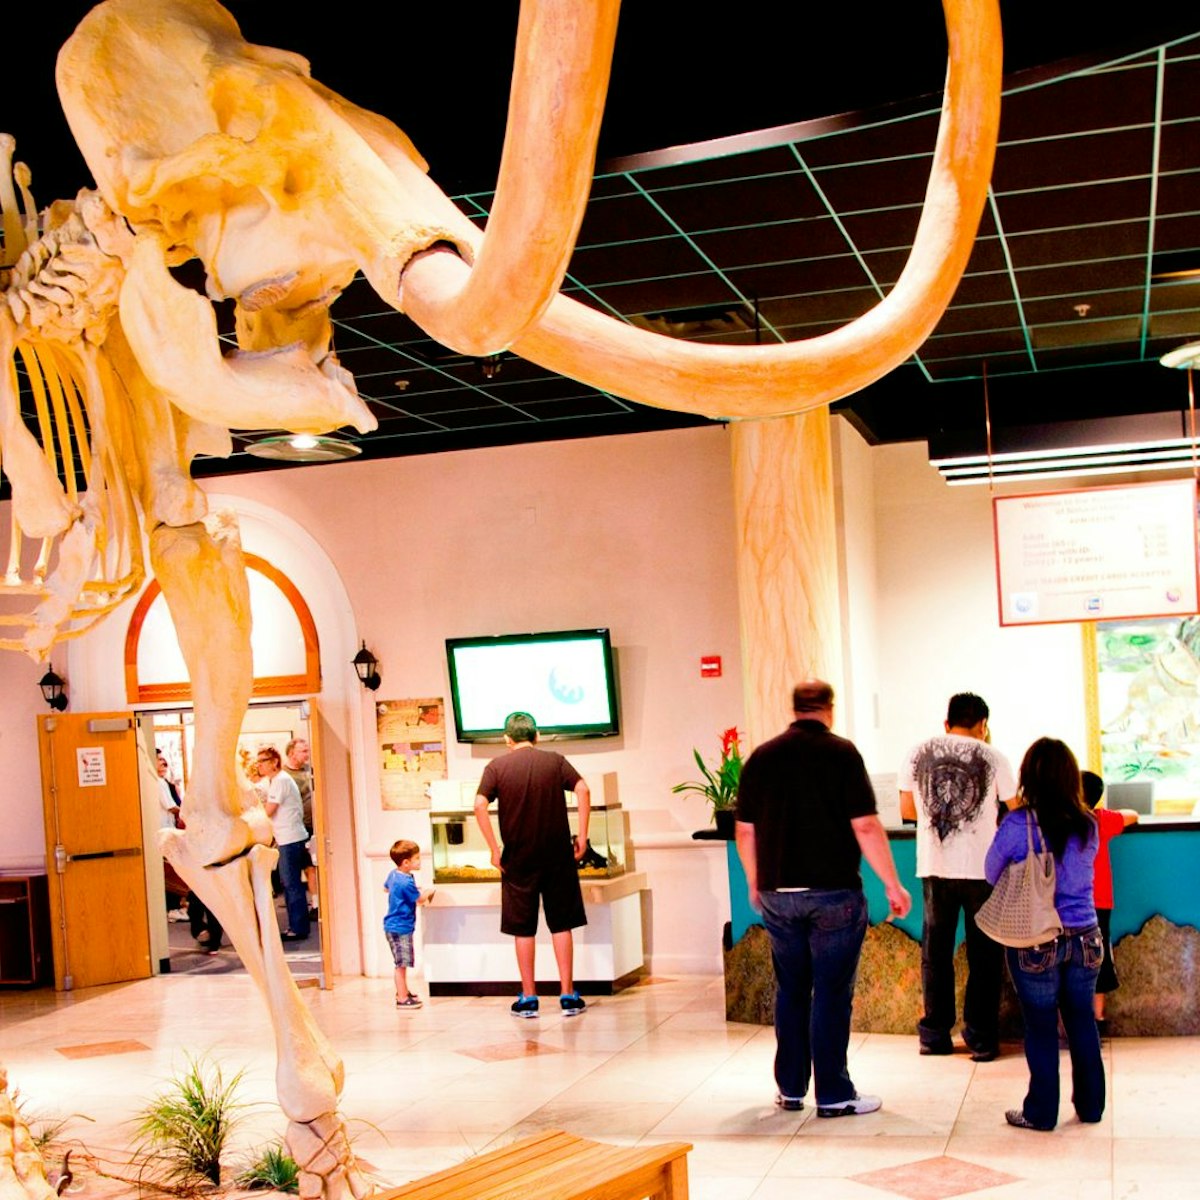 There are dinosaurs and more at Arizona Museum of Natural History -- the only museum of its kind in the great Phoenix area, Mesa, AZ, USA